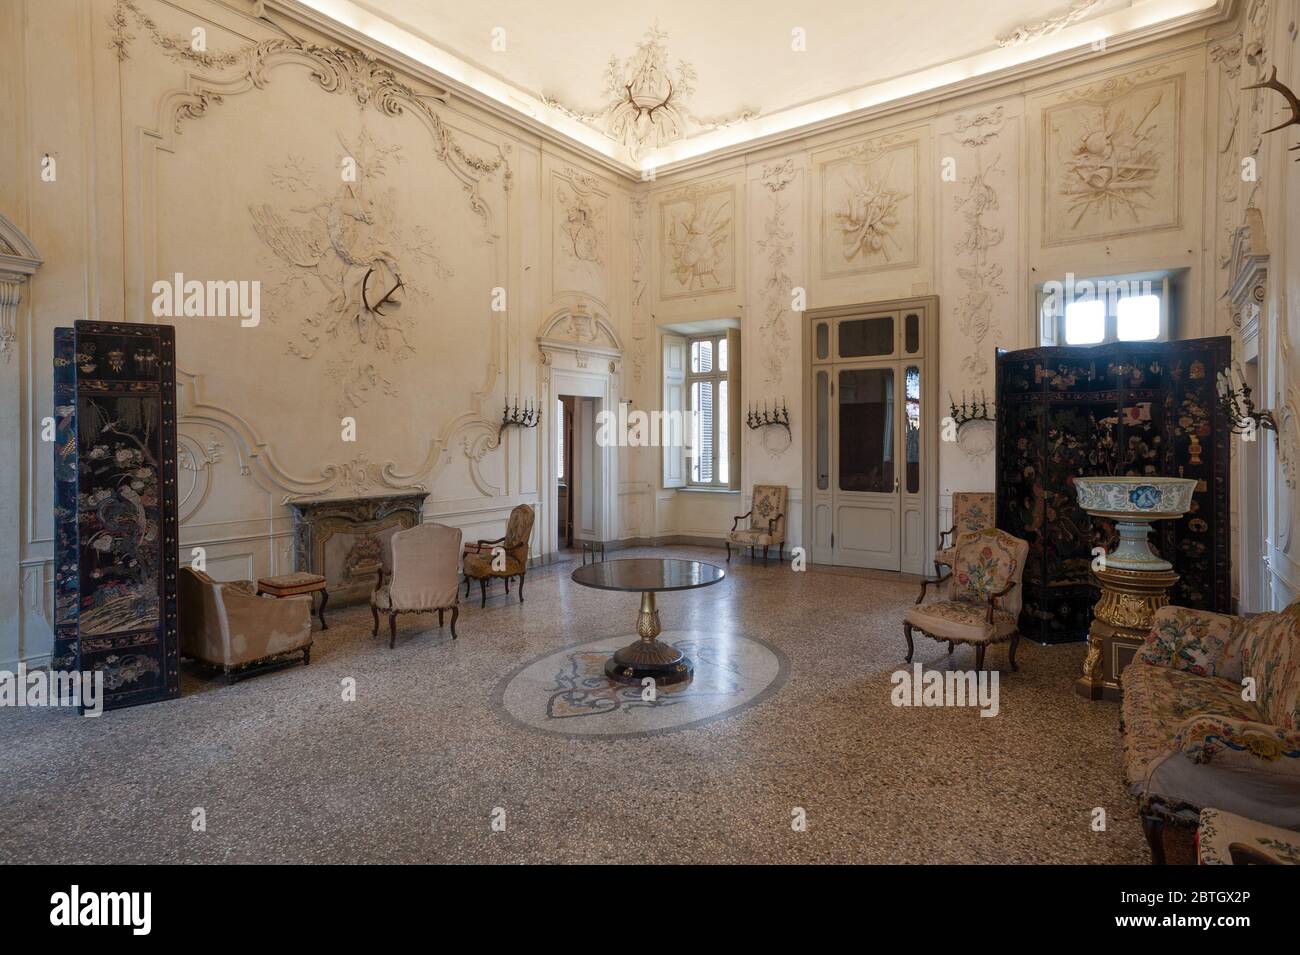 Santena, Italy - December 2010: The entrance hall of the country residence of Camillo Benso, Count of Cavour, next to Turin. Stock Photo